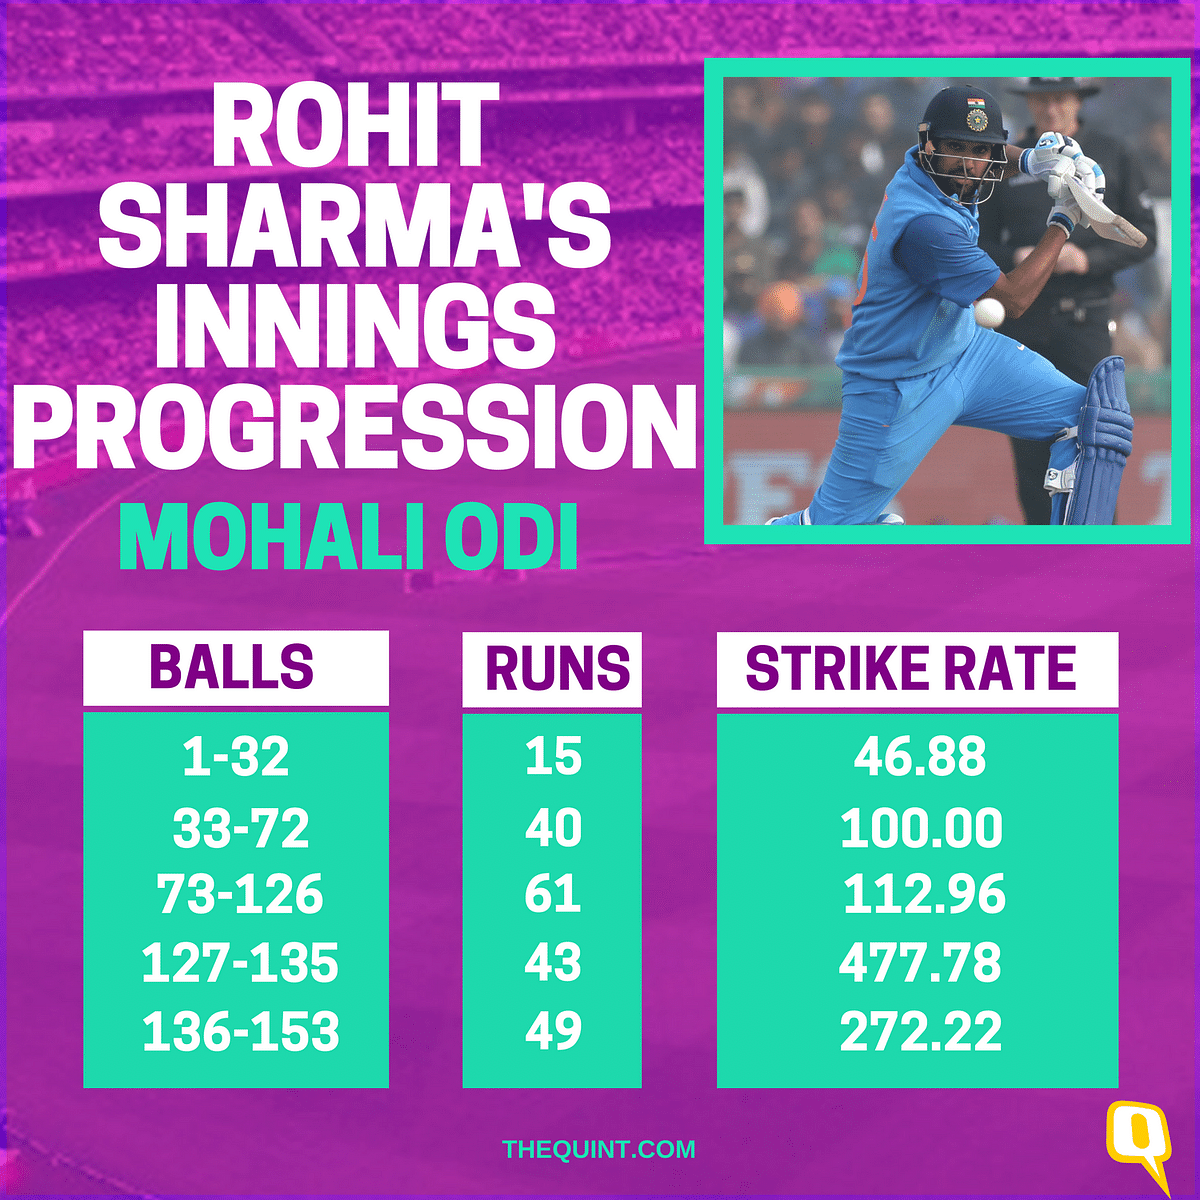 All the records created by Rohit Sharma in his record-breaking double century at Mohali.